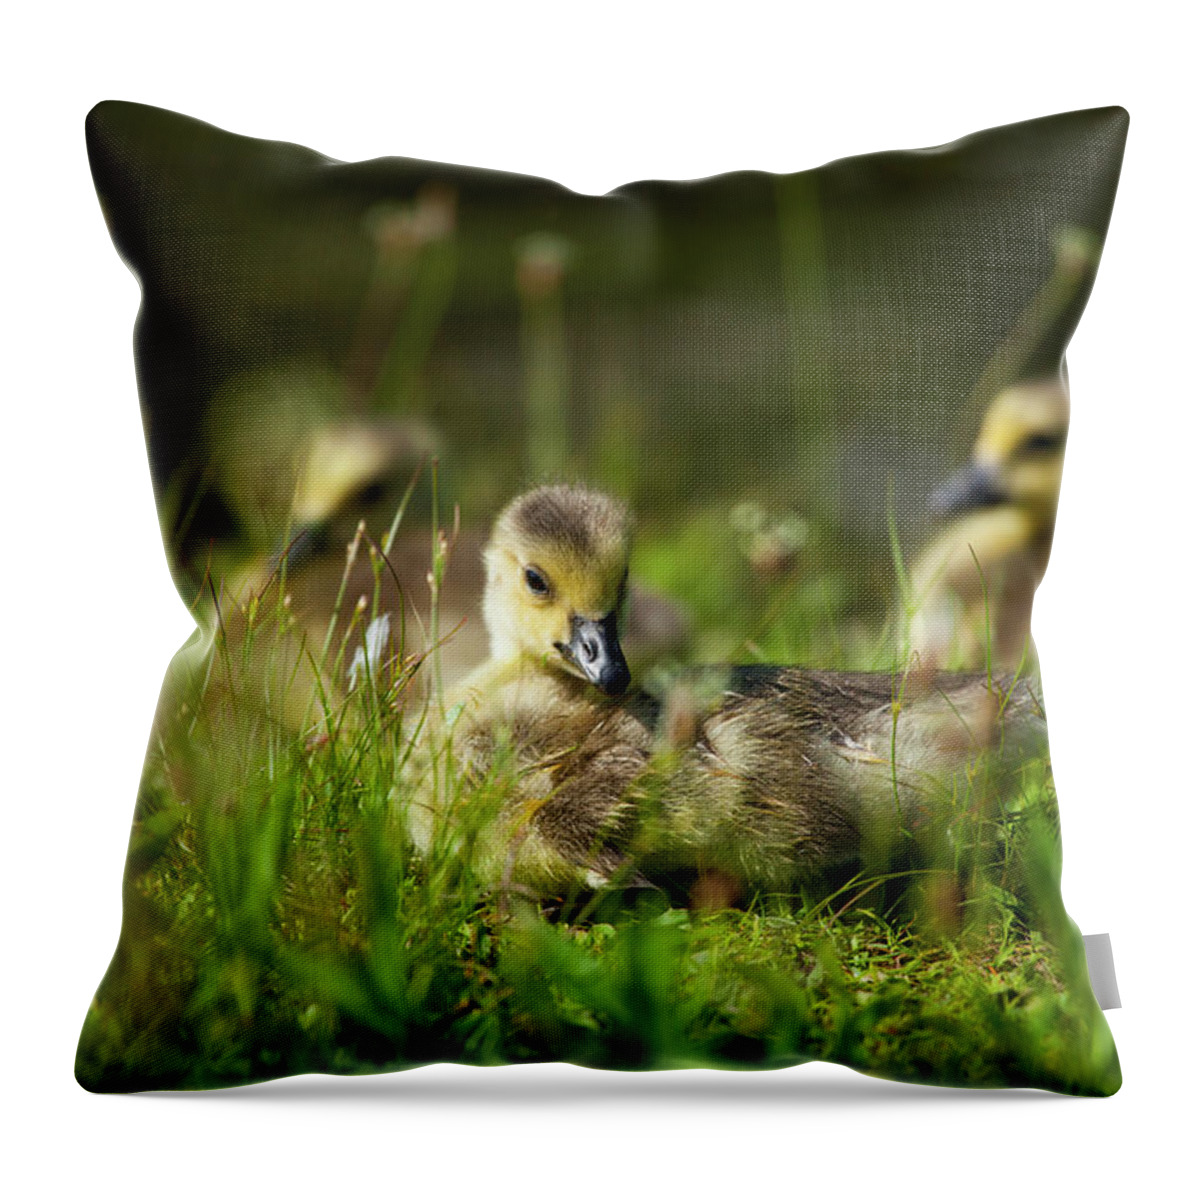 Cute Throw Pillow featuring the photograph Young And Adorable by Karol Livote